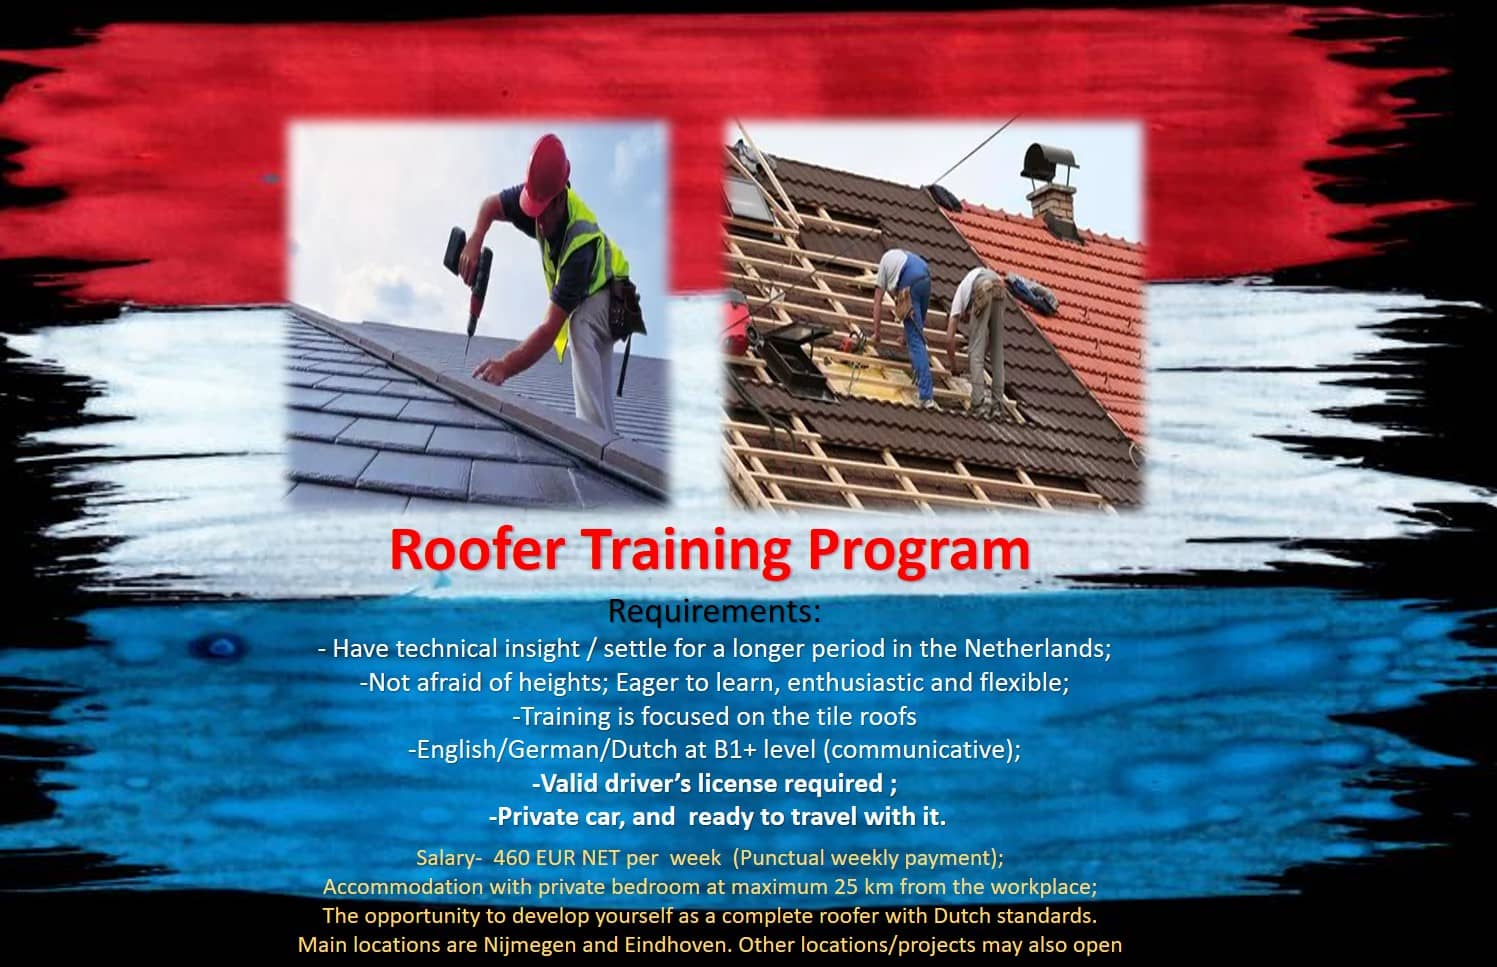 Jobs Netherlands Work Holland Roofer training, Roofer trainings, Roofer training program, Train tile roofer, Training tiles roofers; Experienced fitter, Aluminium steel zinc fitter, PVC fitter, Roofer, Bitomous, Tiles, Synthetic, Slate, Thatched, Roofers Assembly pvc wood aluminium, Steel facade, Curtain wall fitter, Stone facade, Balustrade, Carpenter, job, work in the Netherlands Holland Amsterdam, Eindhoven, Rotterdam, Haarlem